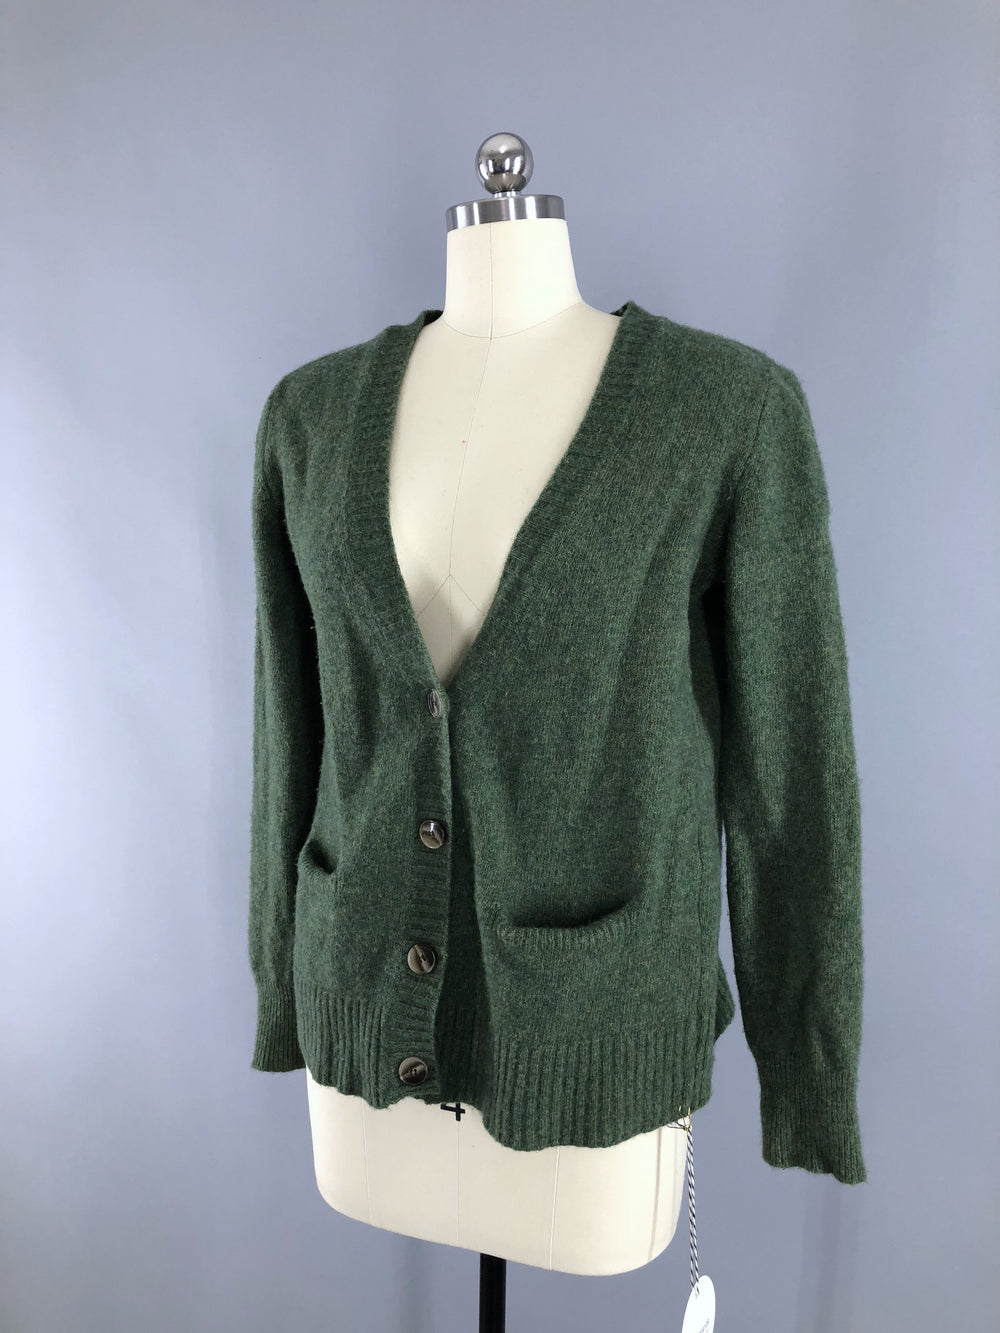 Vintage 1960s Olive Army Green Cashmere Blend Cardigan Sweater